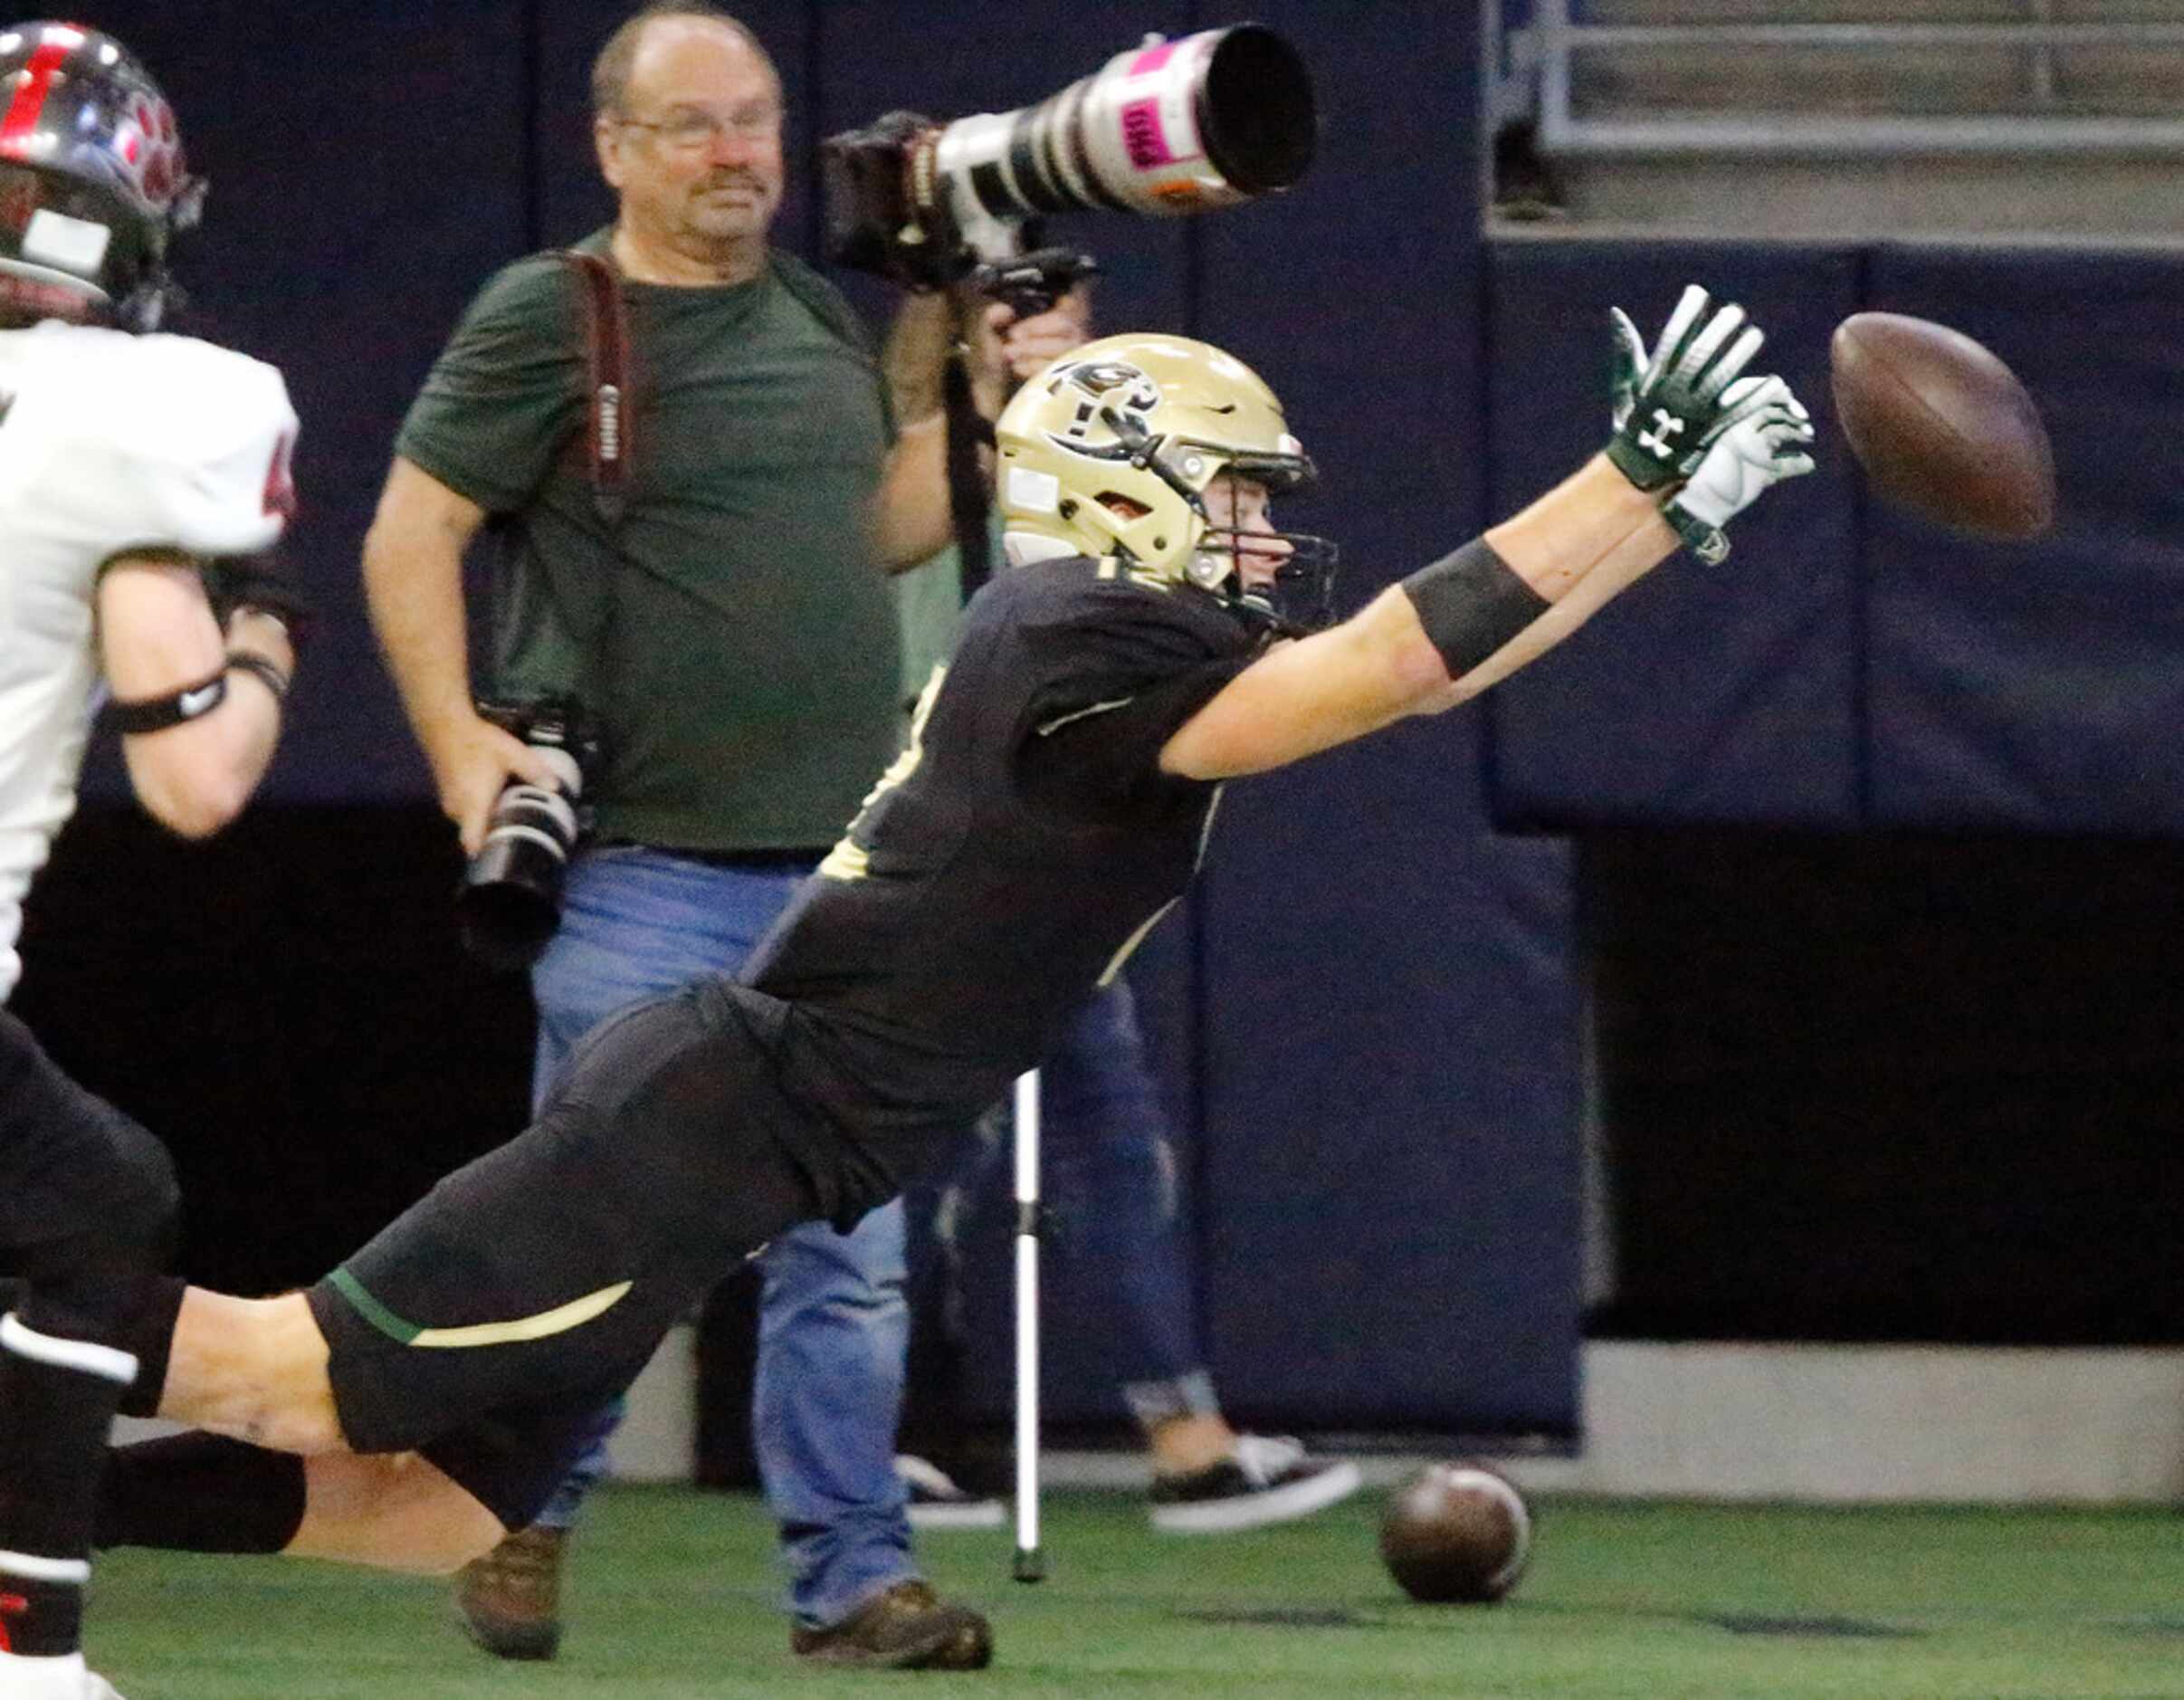 Birdville High School wide receiver Gage Haskins (12) missed this pass, leaving 14 seconds...